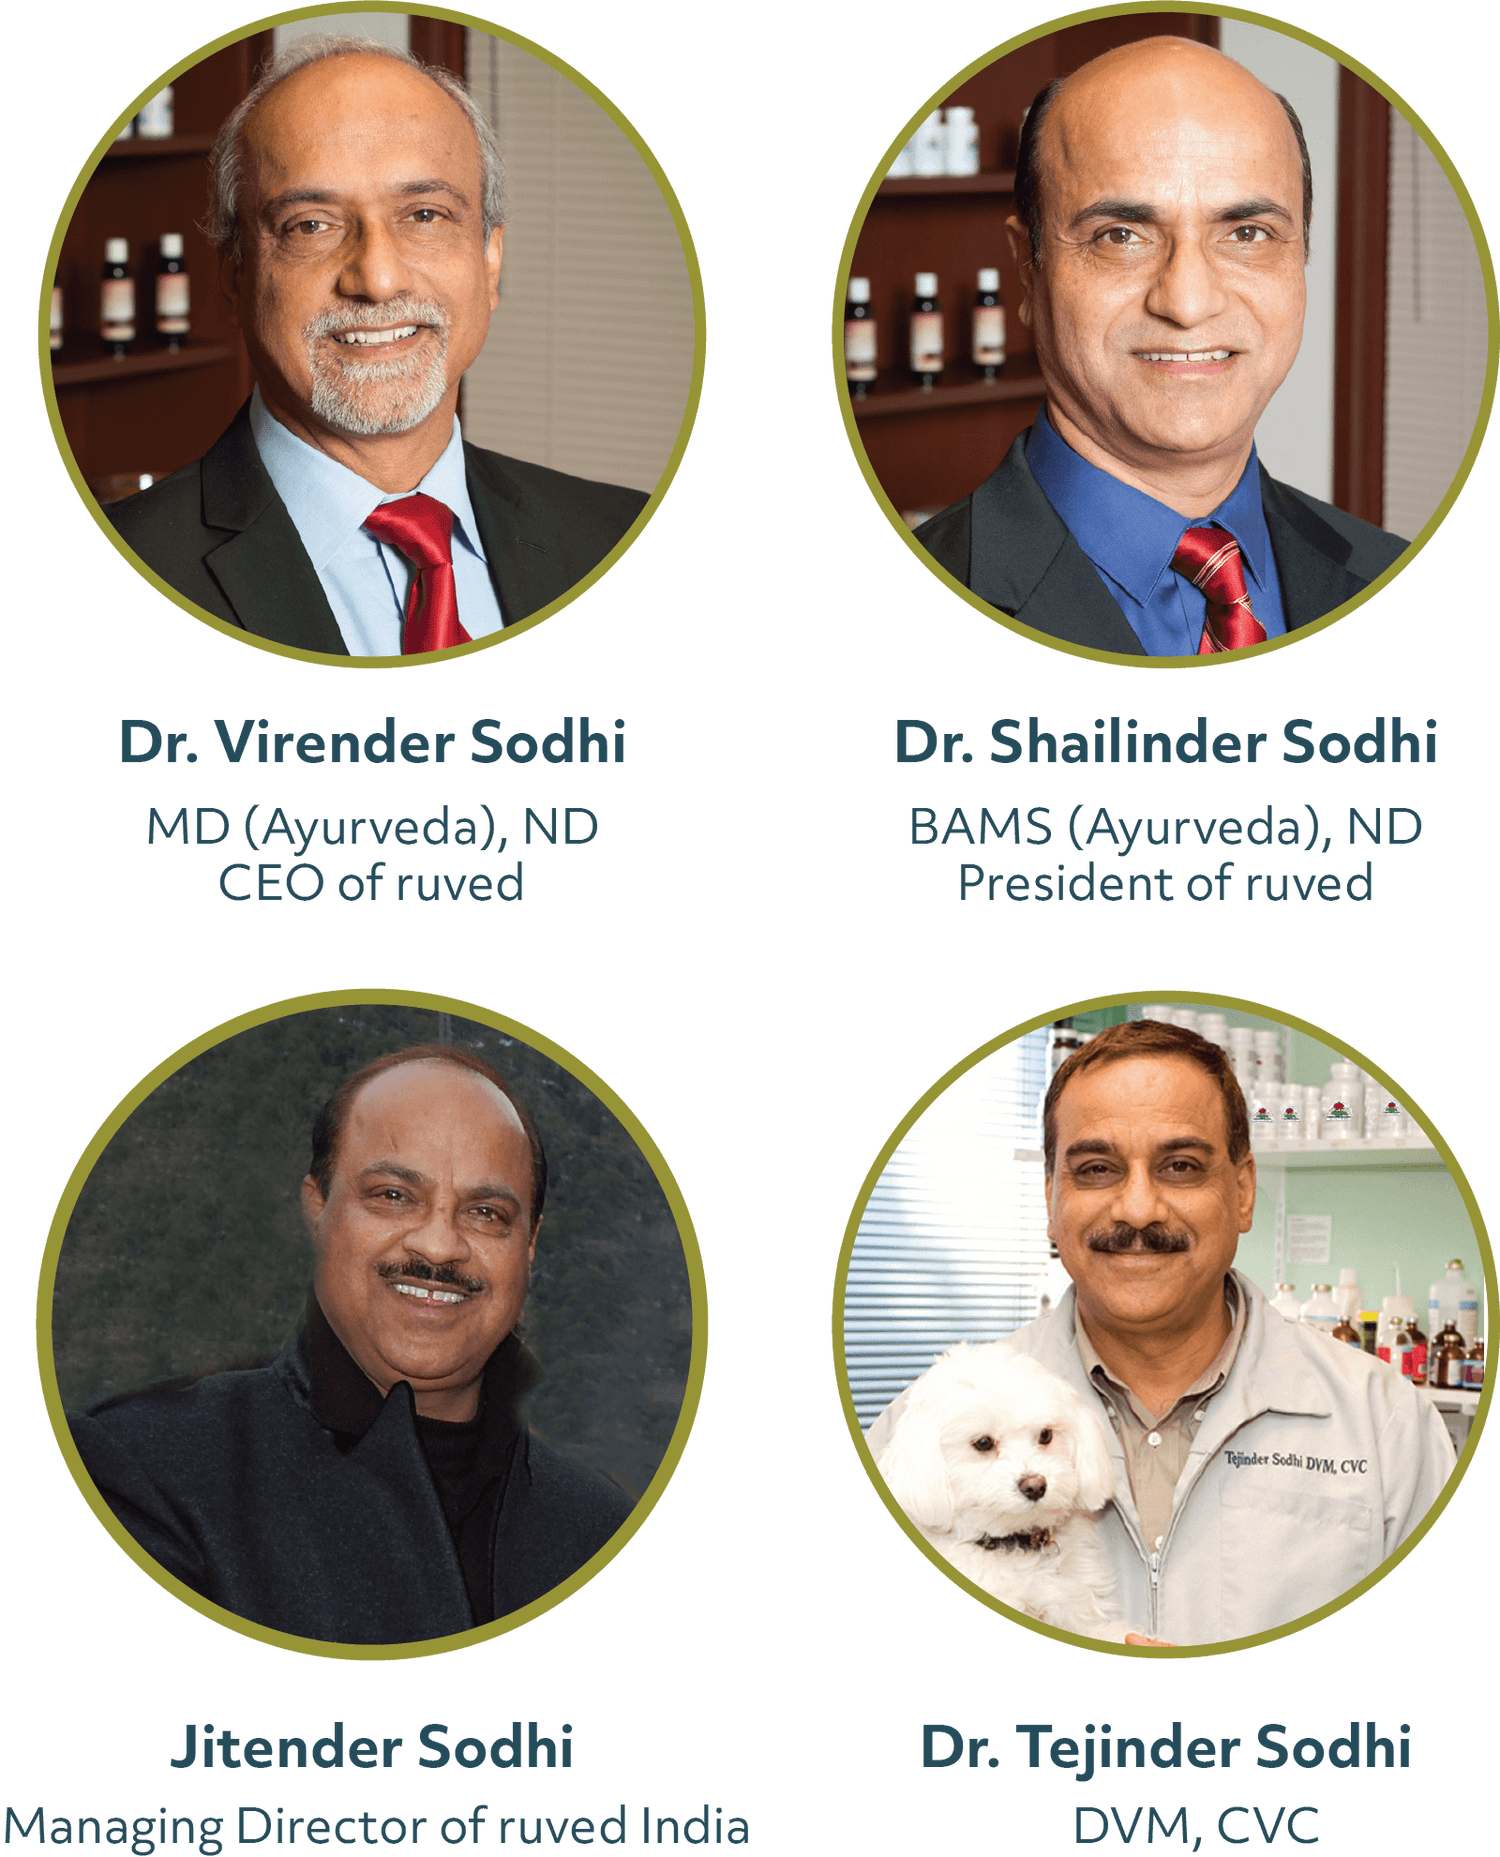 The Sodhi brothers: Dr. Virender Sodhi (CEO of ruved), Dr. Shailinder Sodhi (President of ruved), Jitender Sodhi (Managing Director of ruved), and Dr. Tejinder Sodhi.